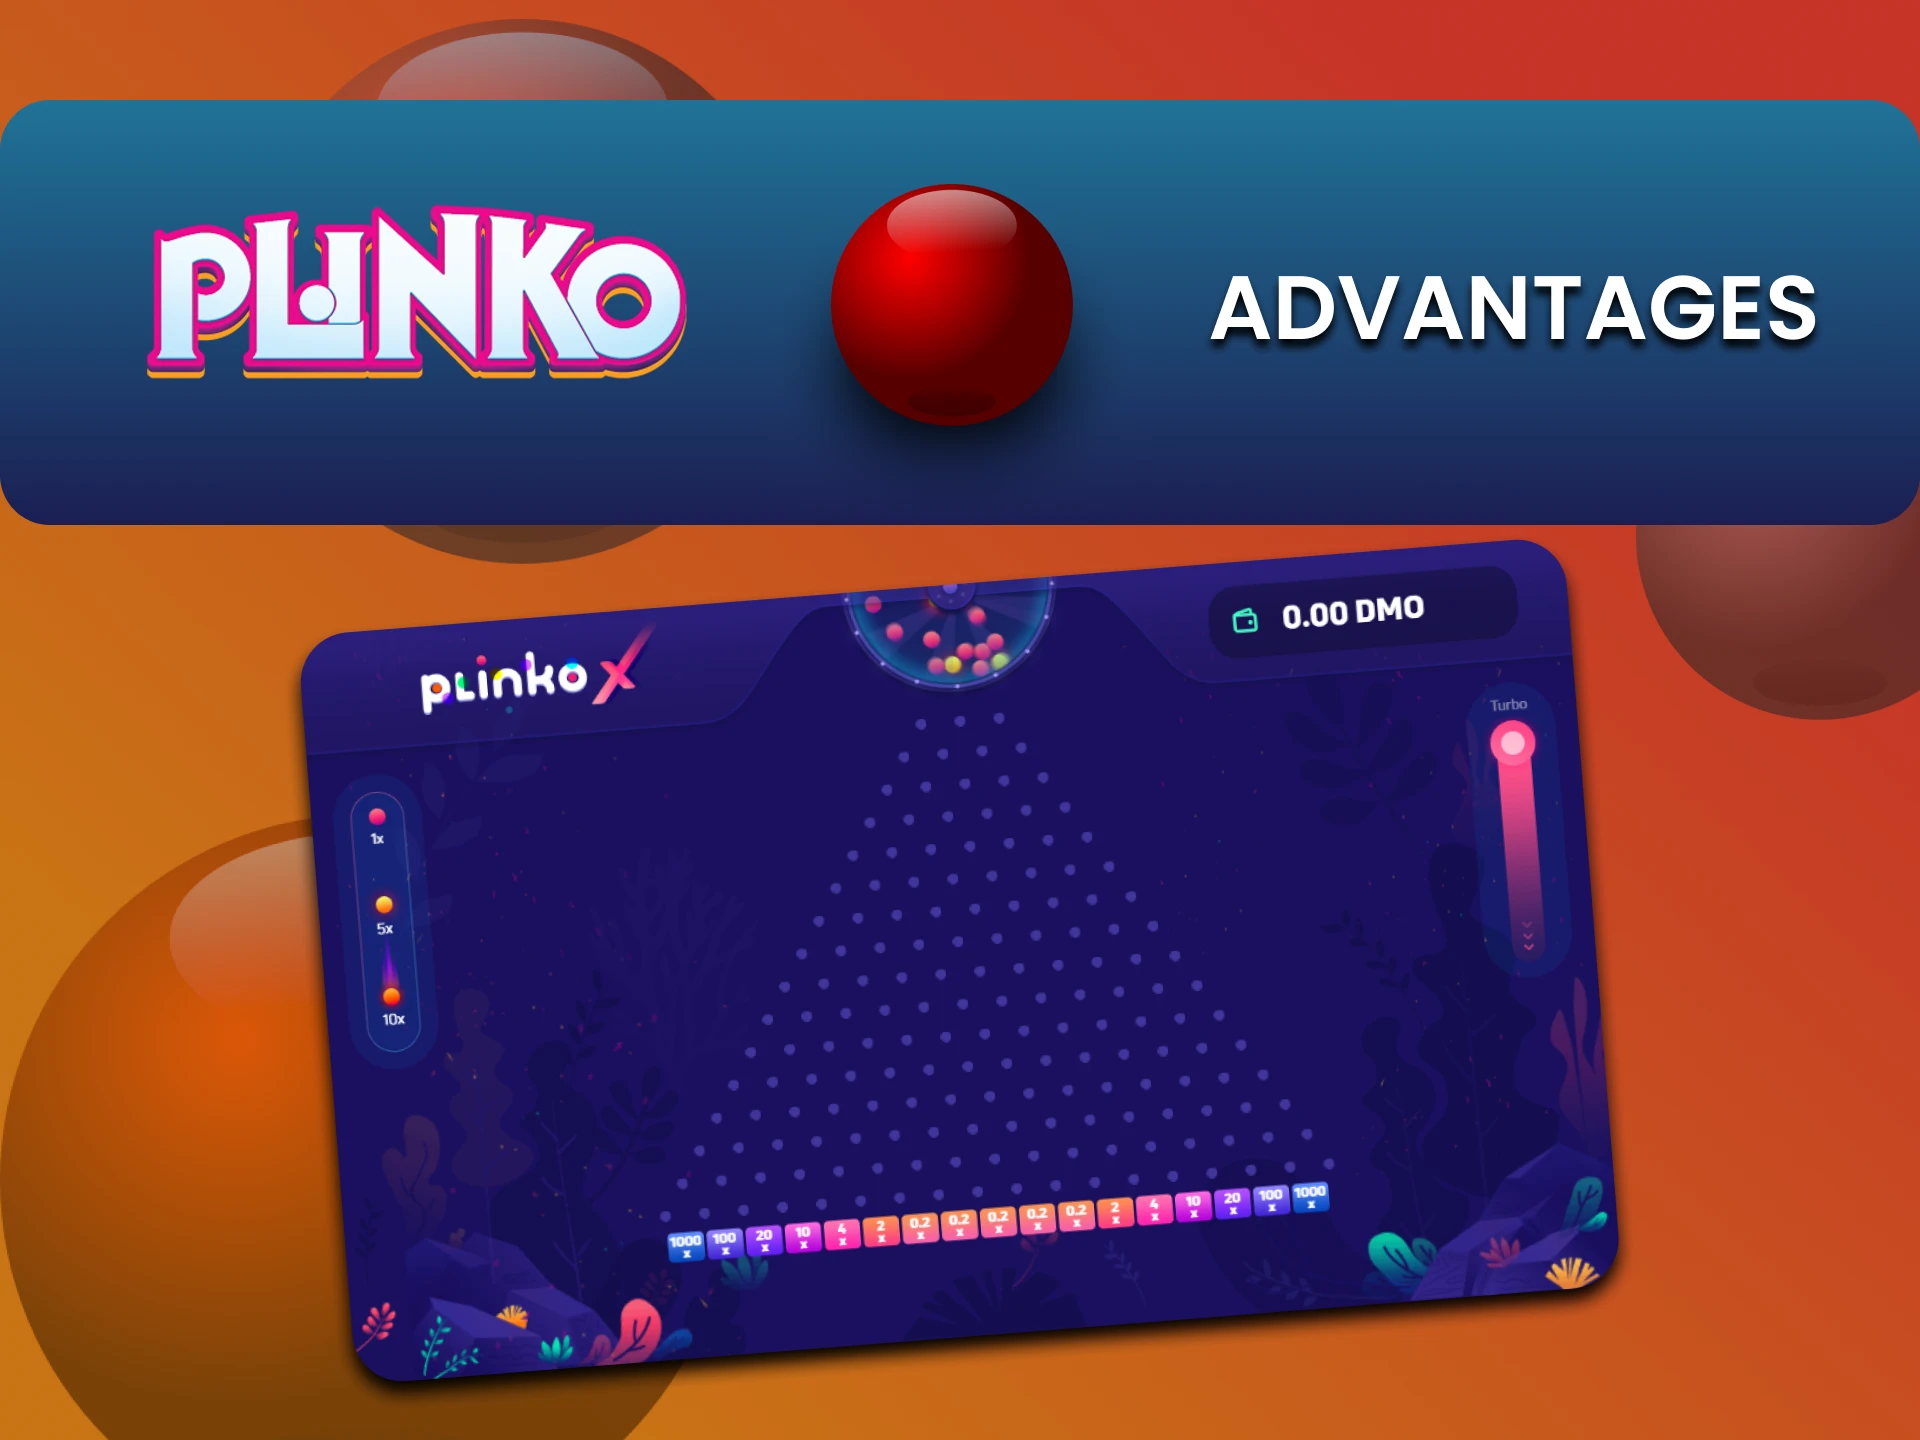 The demo version of the Plinko game will help you learn new strategies without loss.